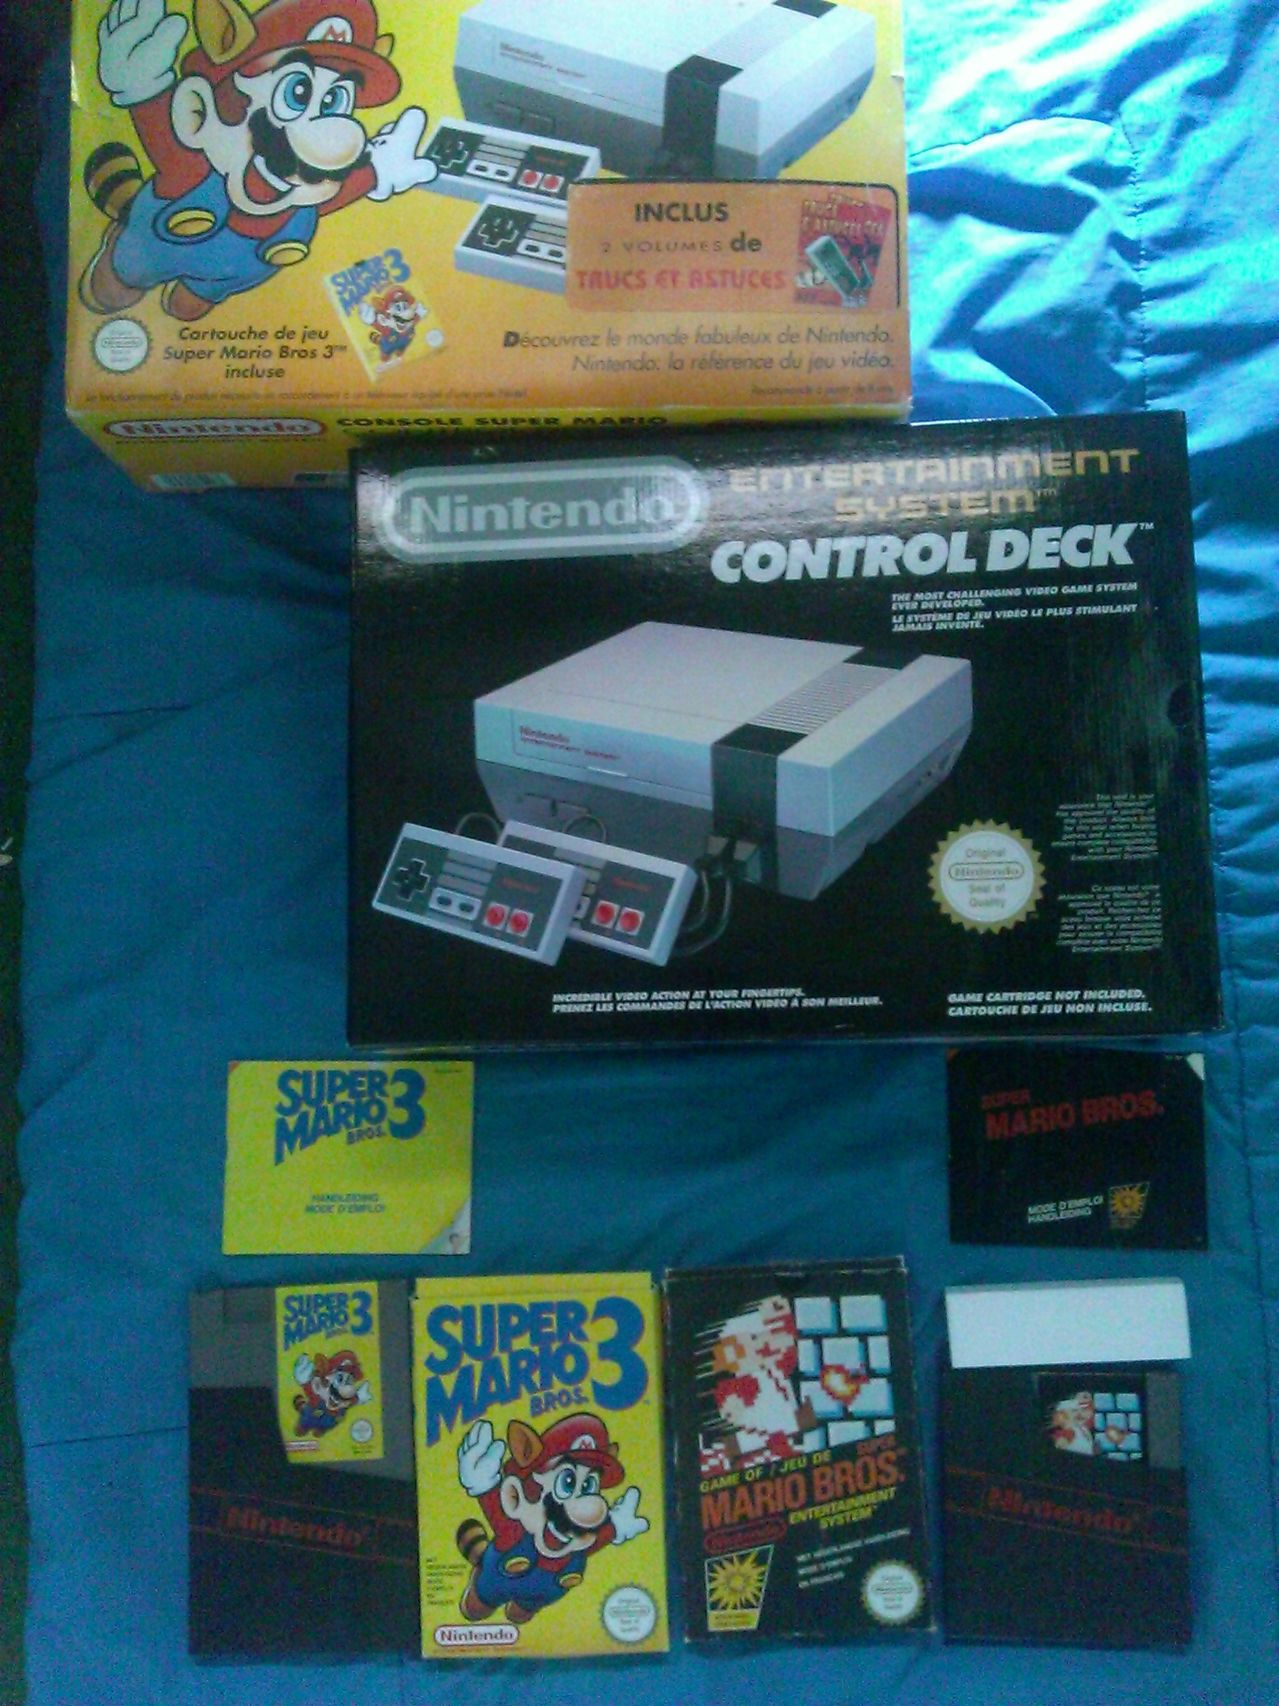 Nintendo Nes pack mario bros 3 playeur one comme neuf WP_20130422_006